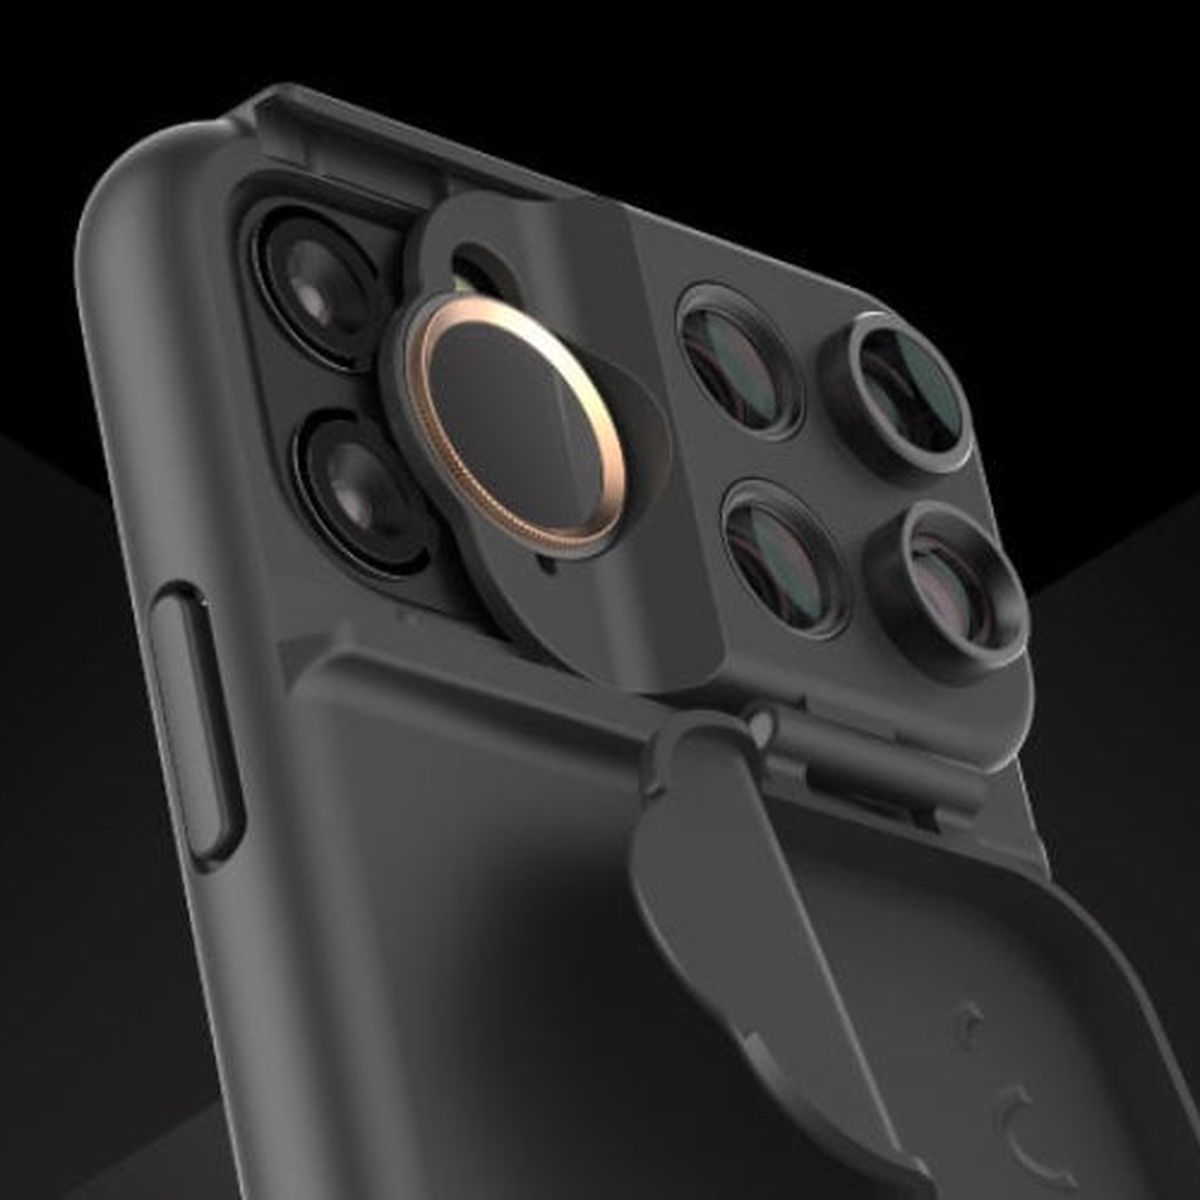 Shiftcam add-on lens cases are now available for Apple's iPhone 11 models:  Digital Photography Review